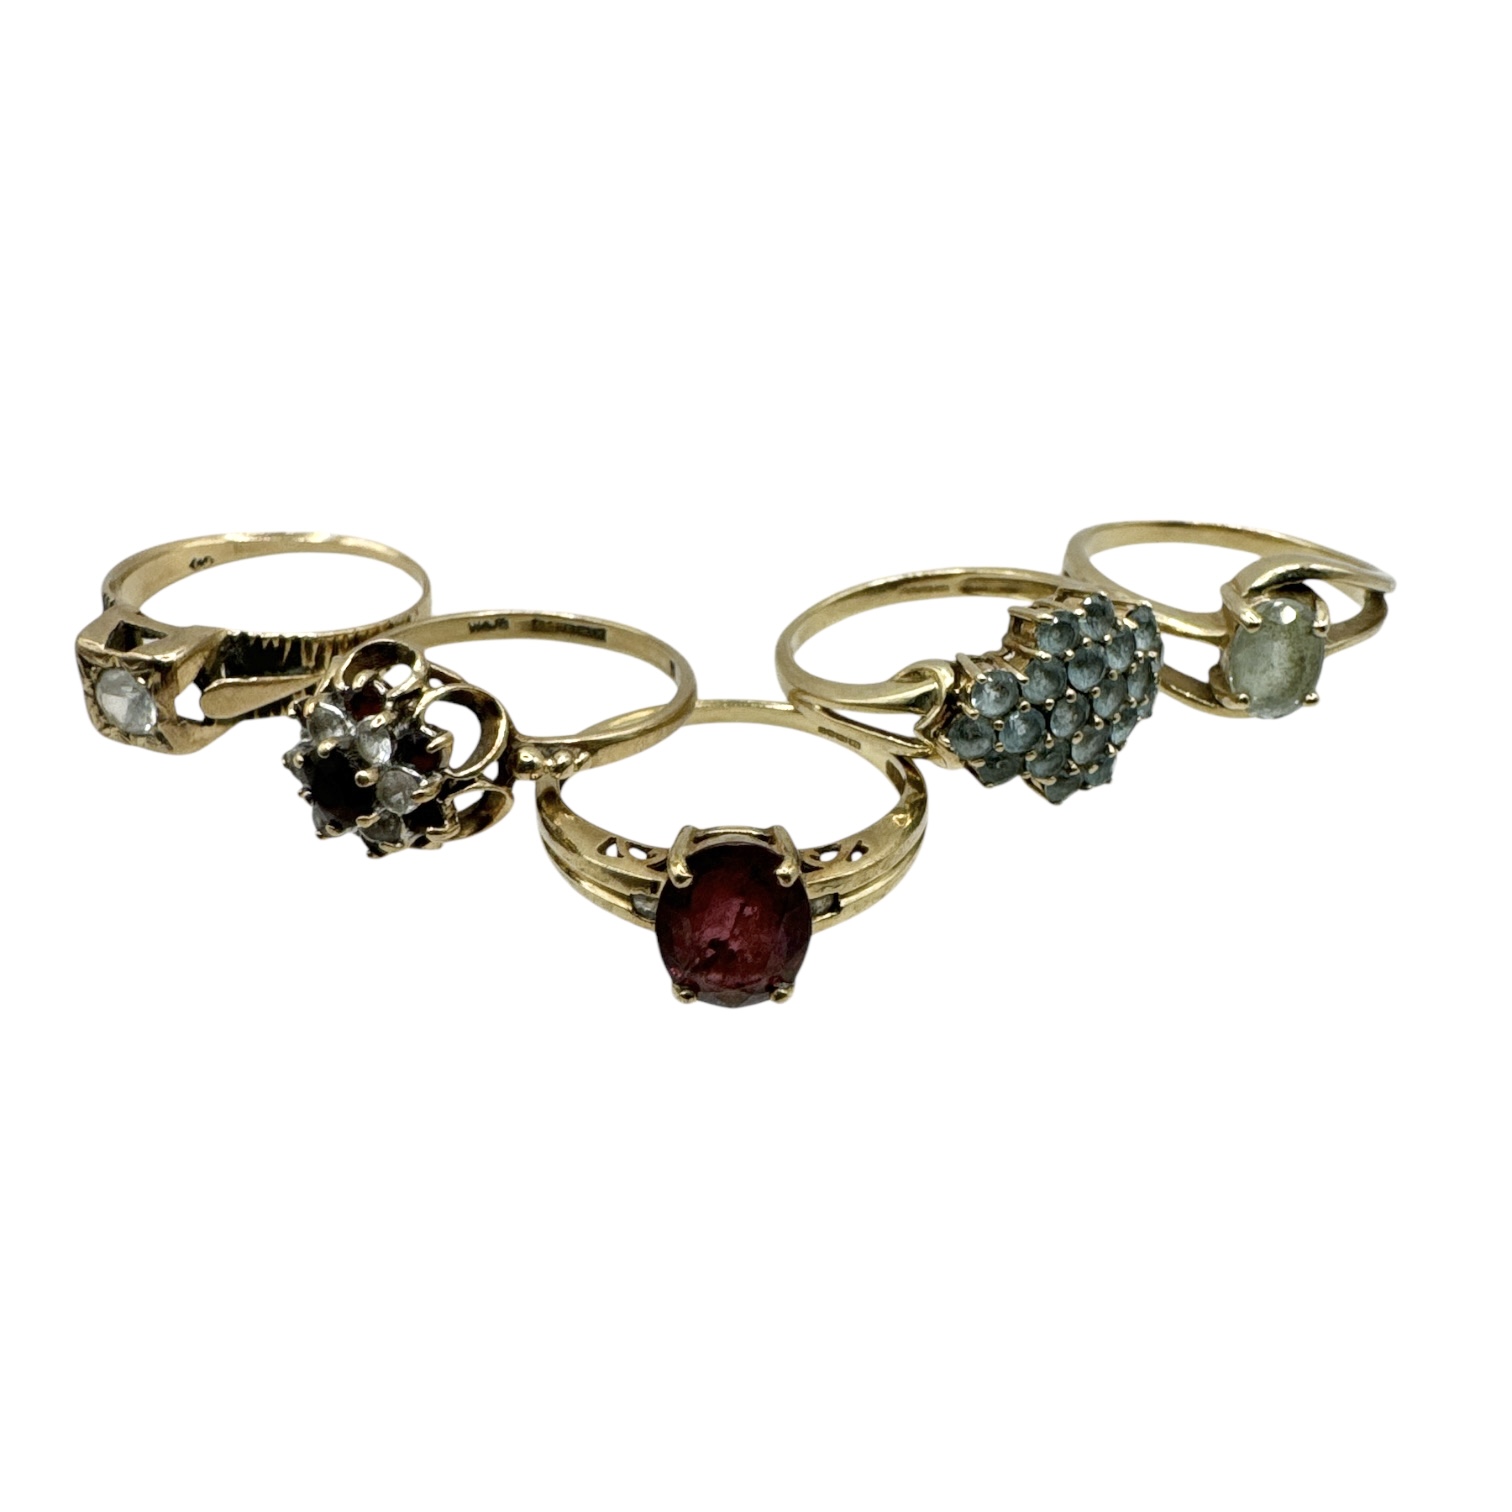 A collection of five 9ct gold gem set rings, all between sizes M-O. Gross weight approximately 12.28